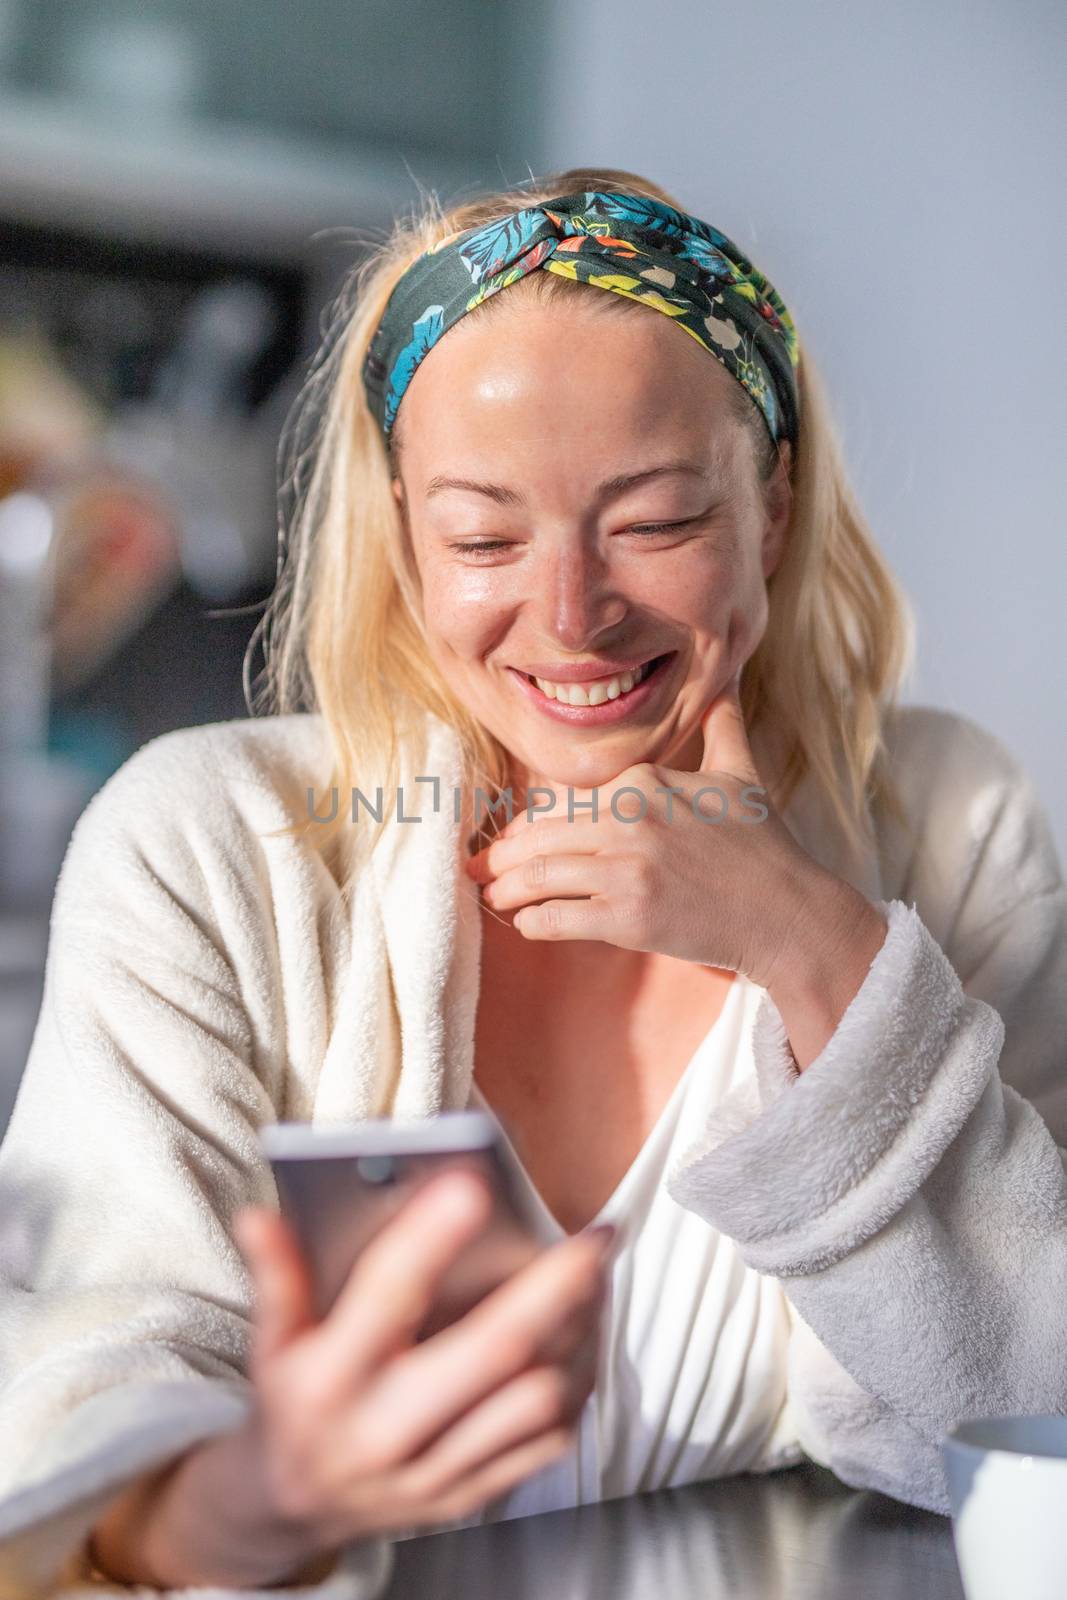 Beautiful caucasian woman at home, feeling comfortable wearing white bathrobe, taking some time to herself, drinking morning coffee and reading news on mobile phone device in the morning.